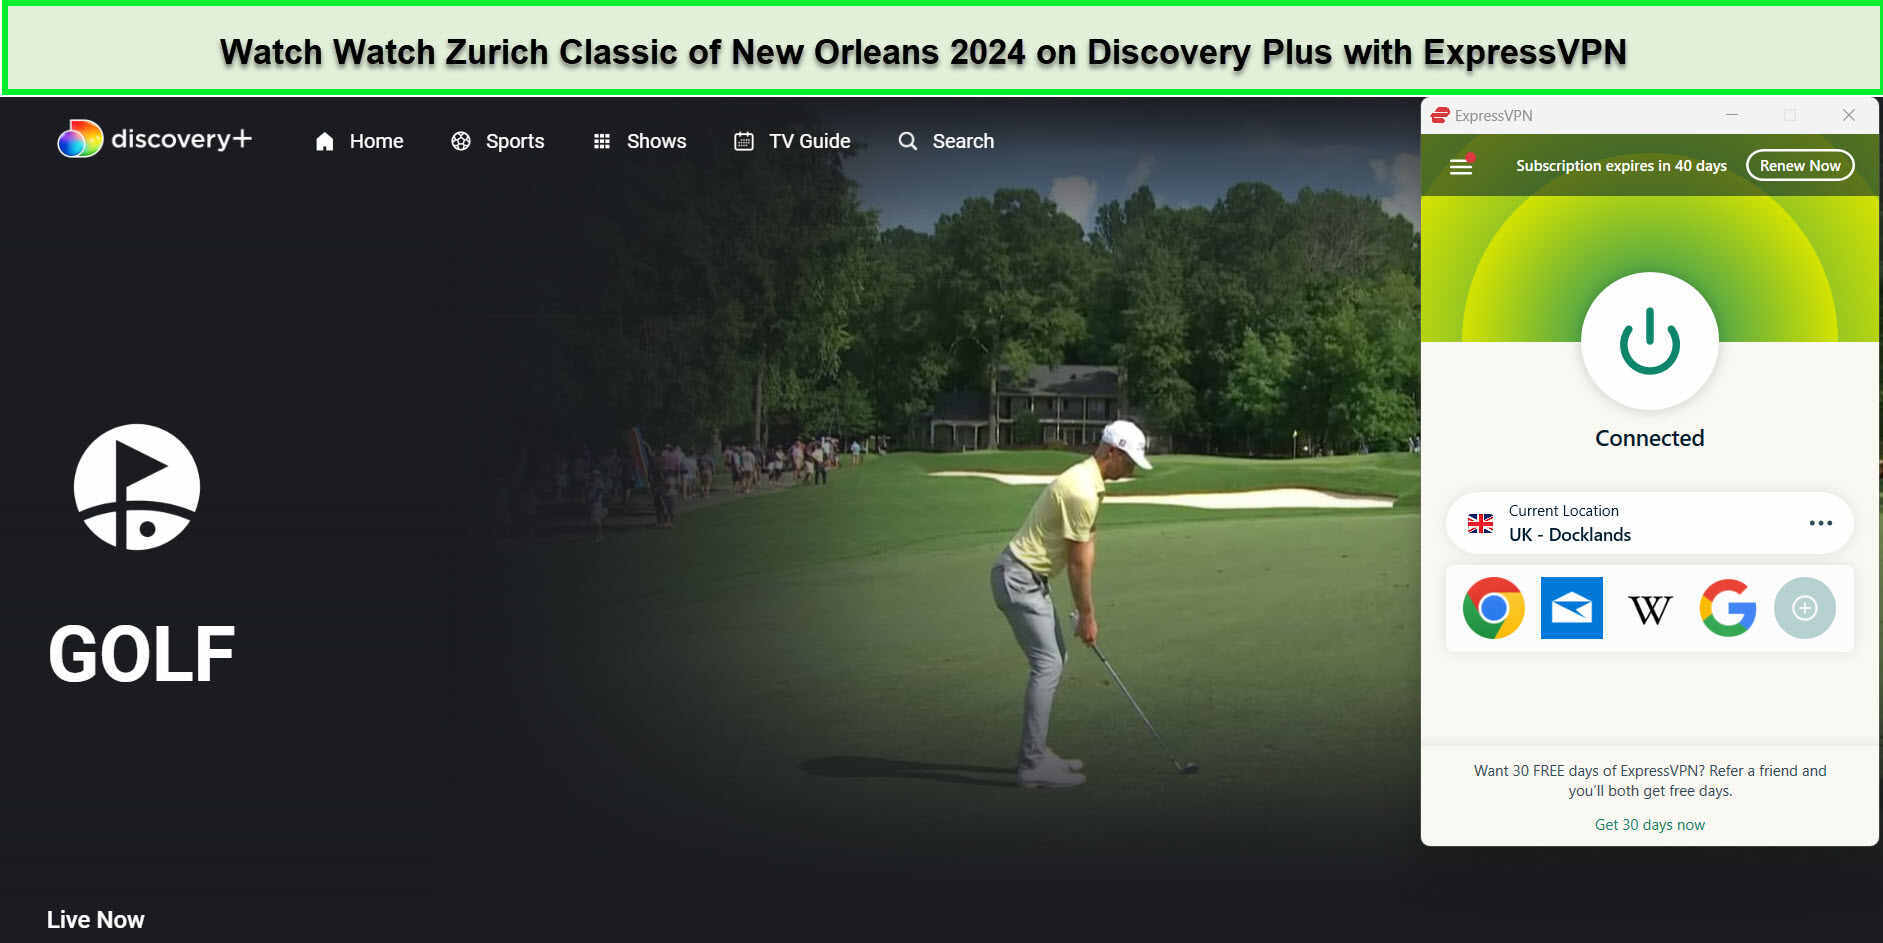 Watch-Zurich-Classic-of-New-Orleans-2024-in-Netherlands-On-Discovery-Plus-with-ExpressVPN